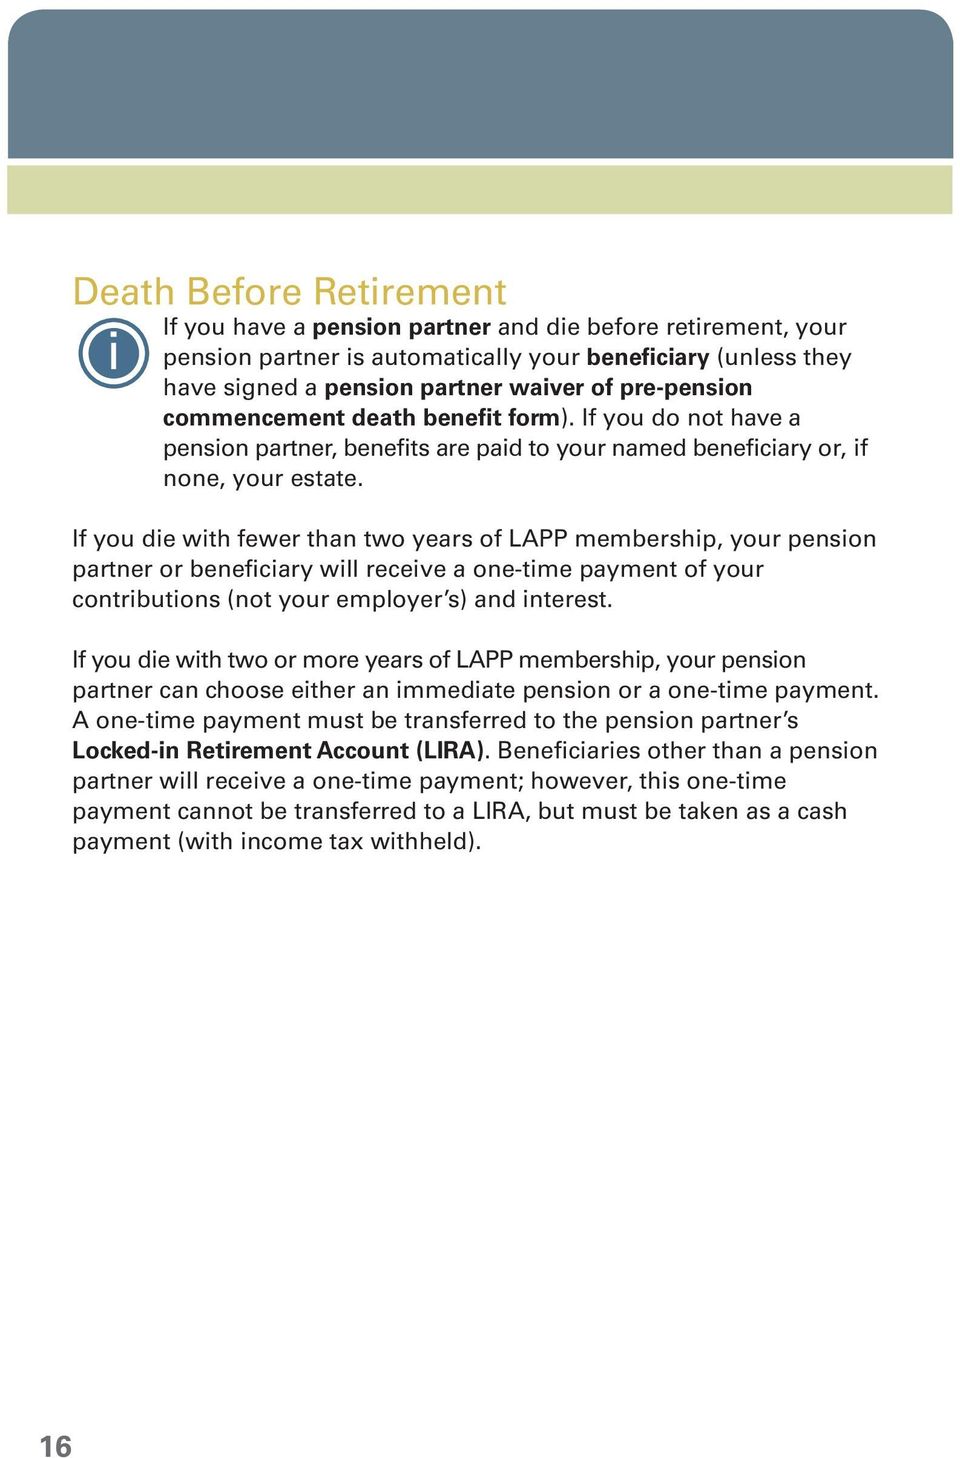 If you die with fewer than two years of LAPP membership, your pension partner or beneficiary will receive a one-time payment of your contributions (not your employer s) and interest.